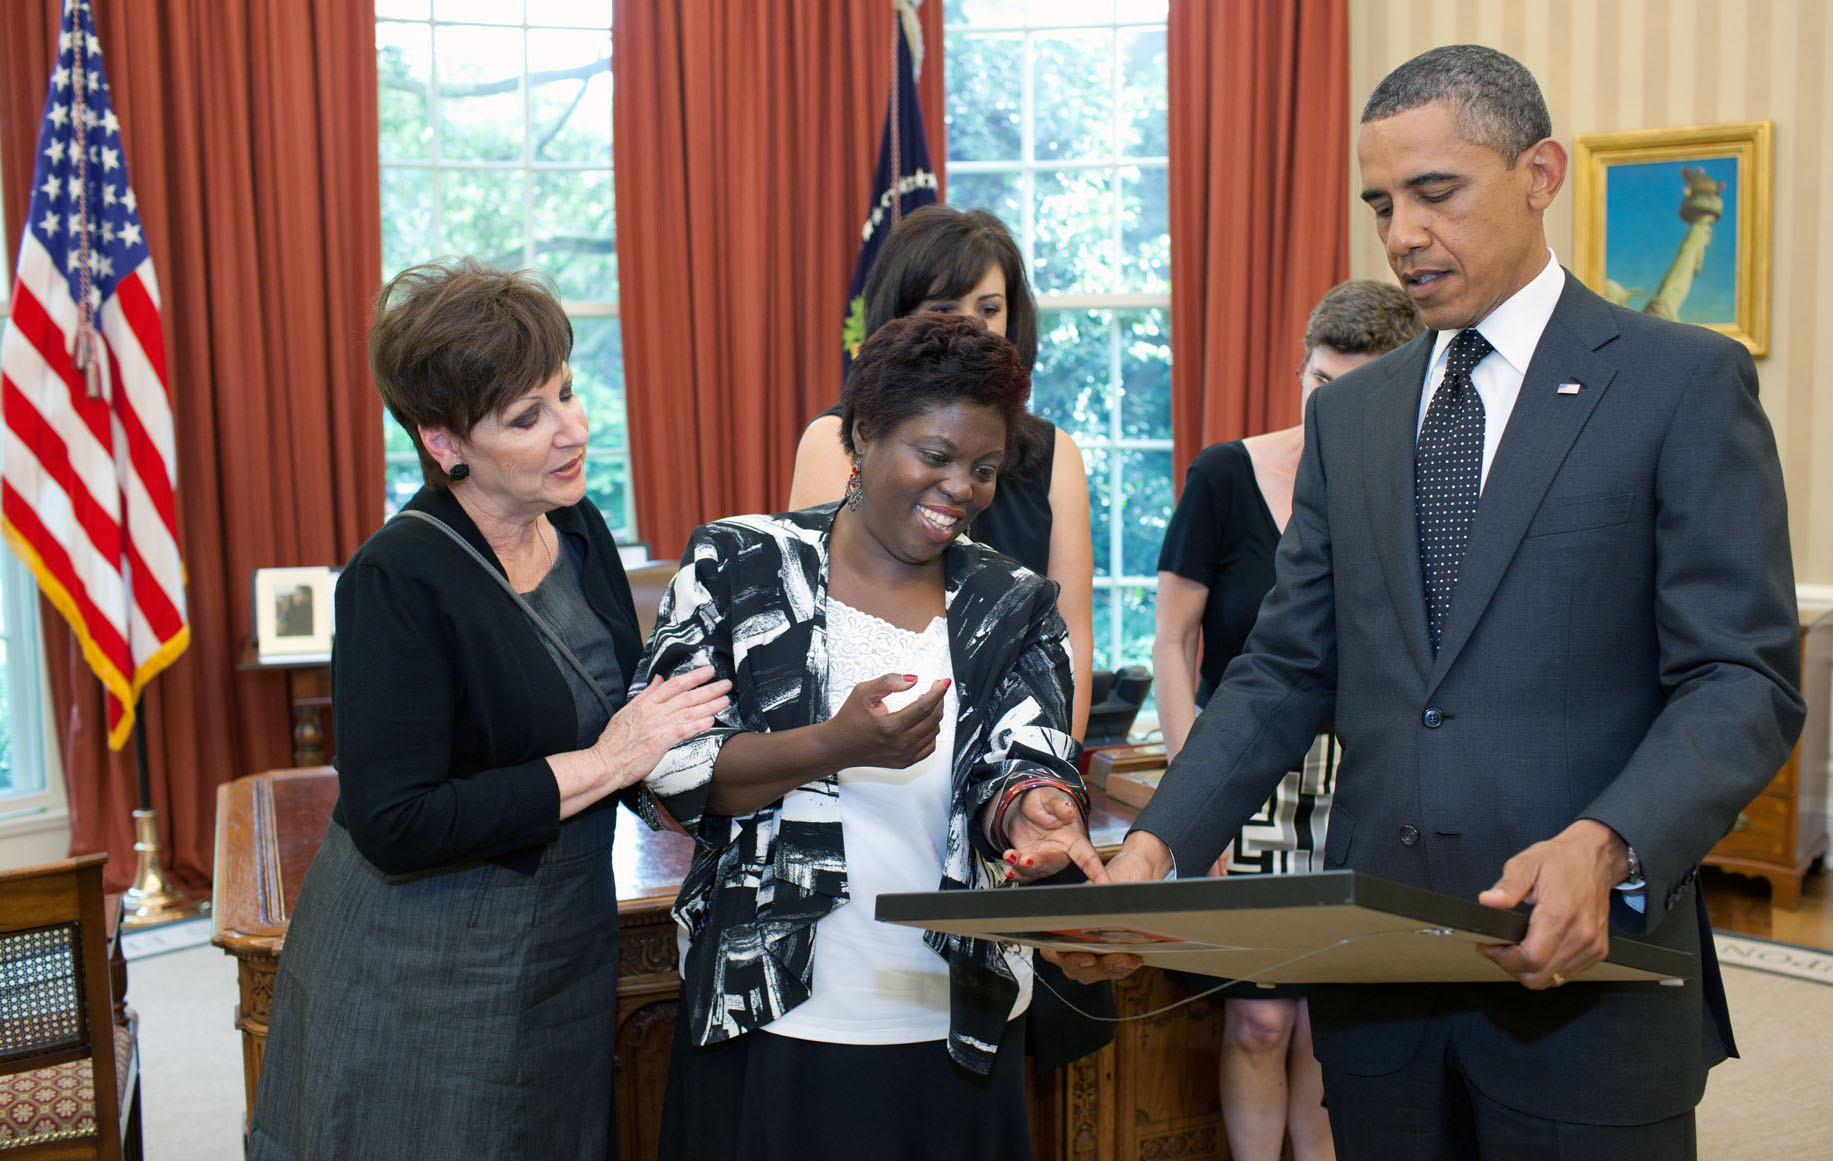 A group picture in the Oval Office. President Obama, wearing a suit, is holding a large picture frame in front of a group of four other people. To his right stands Lois Curtis, an African American woman with short curly hair wearing a blazer, gestures at the picture frame that holds her artwork. 